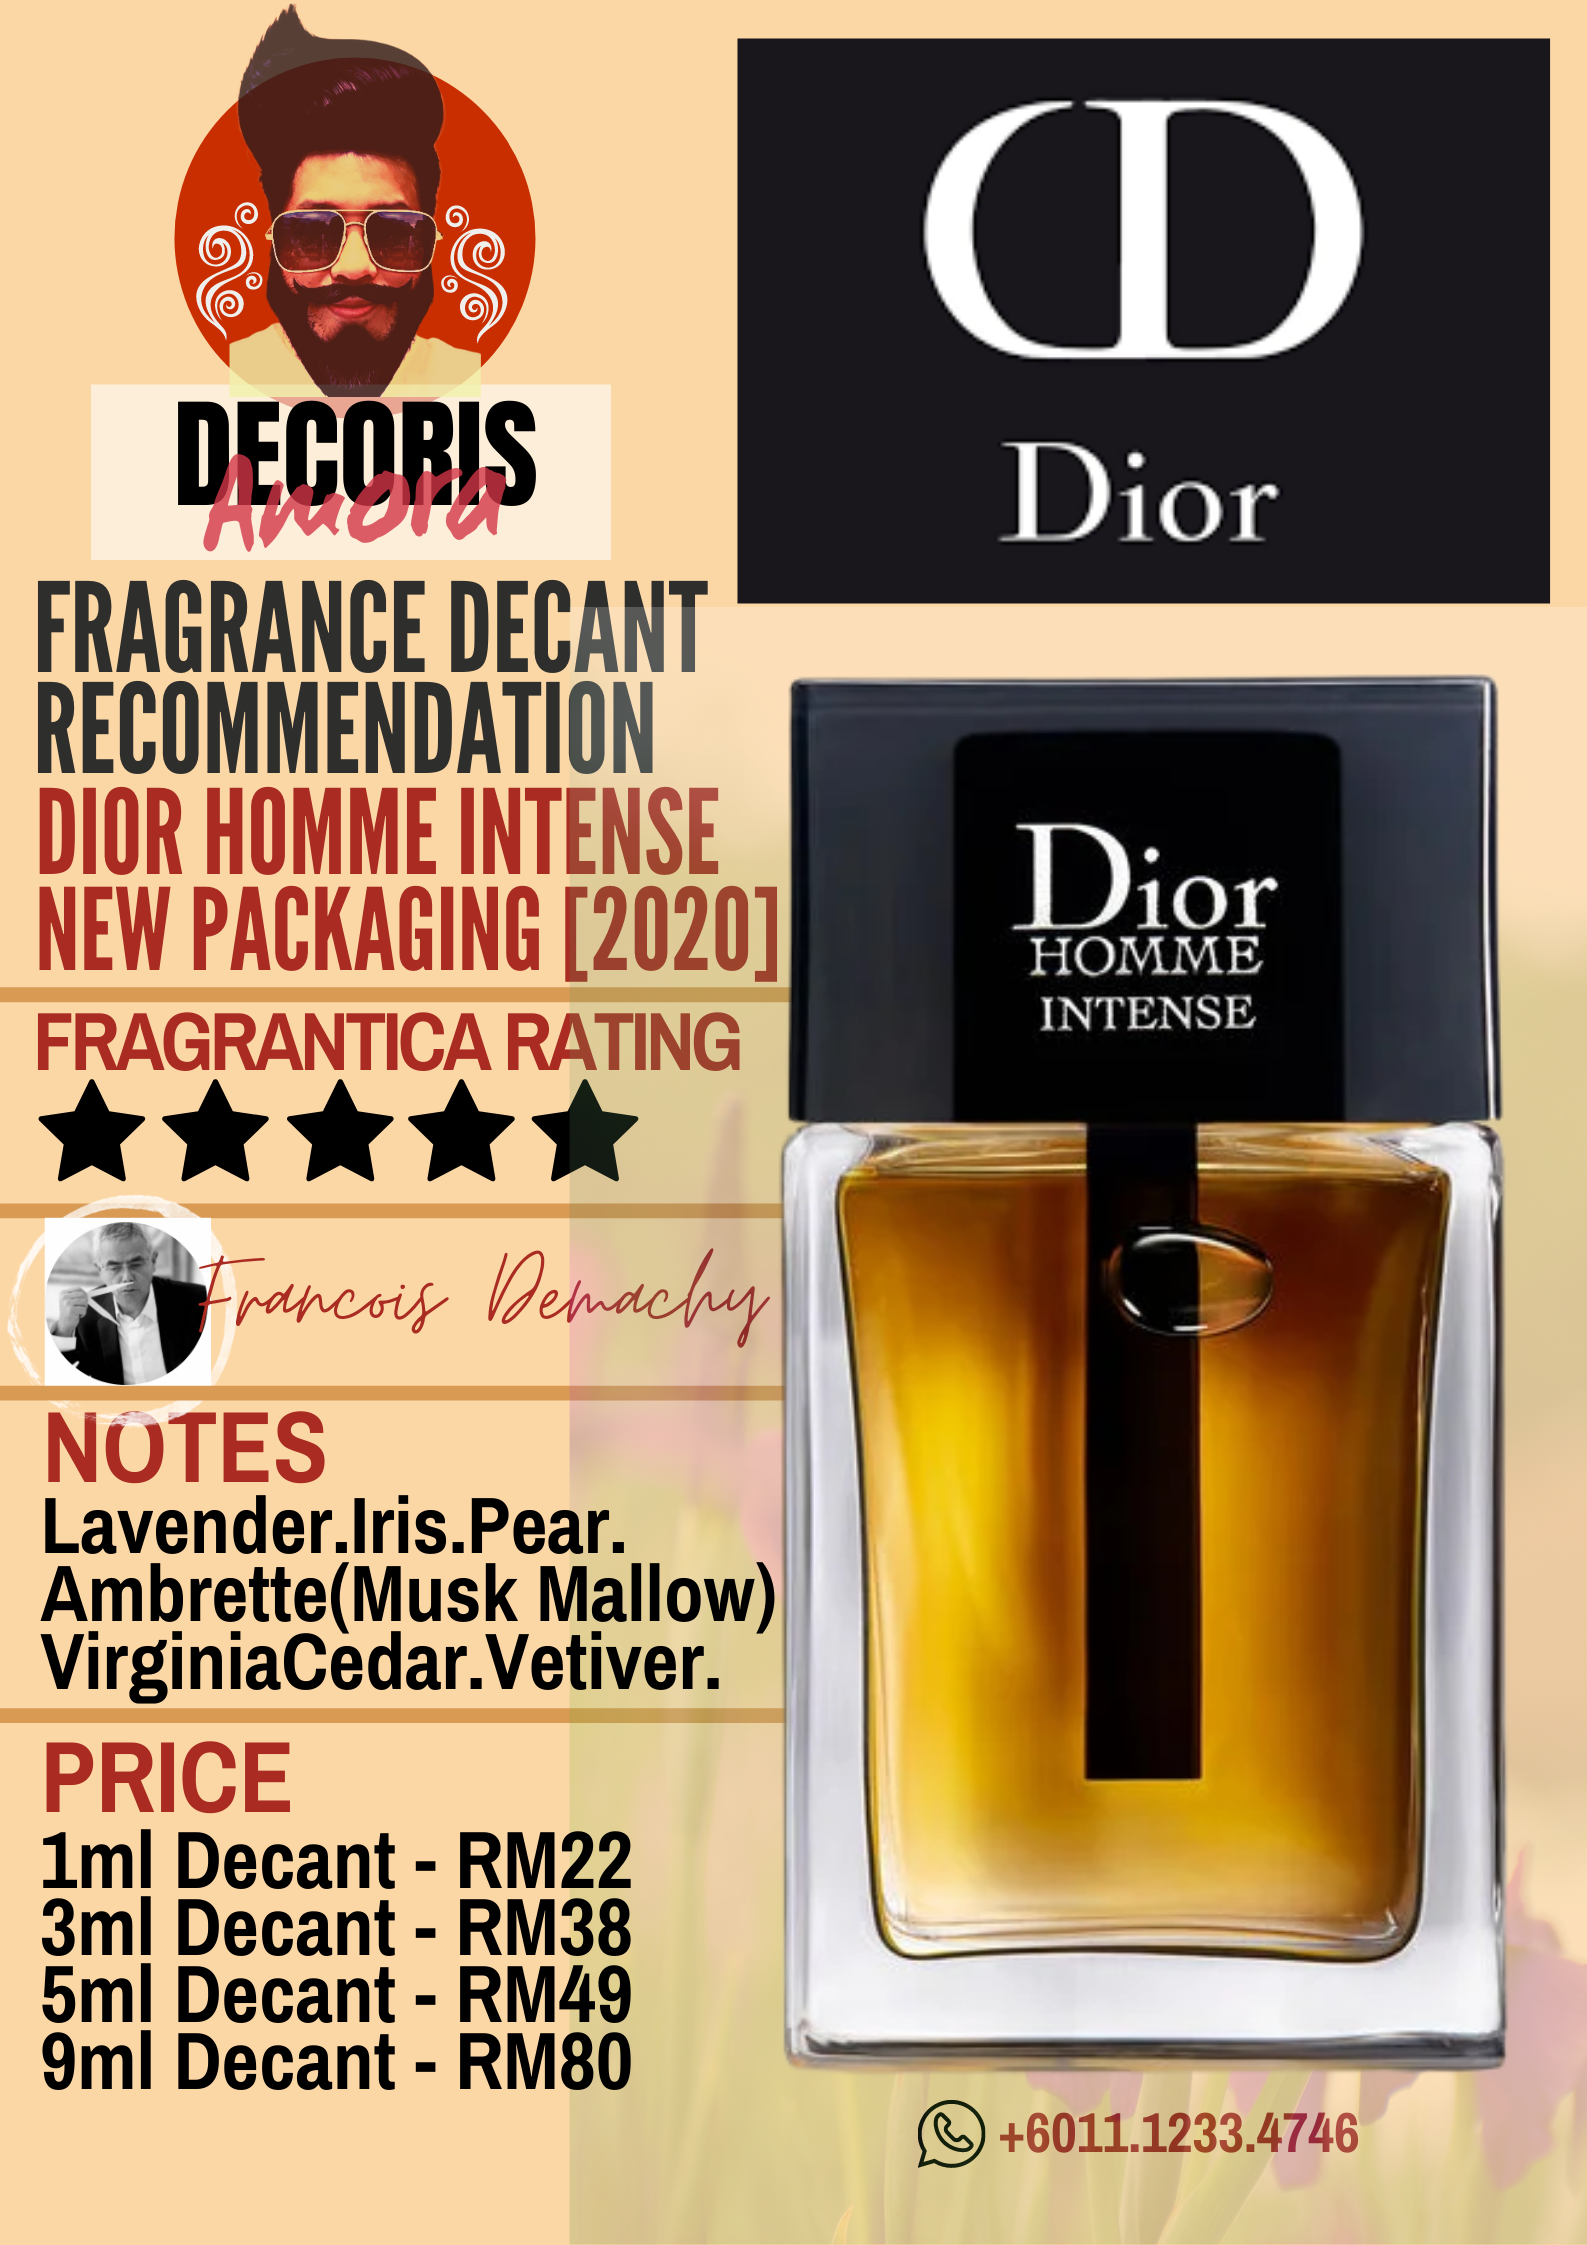 Dior Homme Intense 2011 (New Packaging 2020) - Perfume Decant – Decoris  Amora Perfume Decant